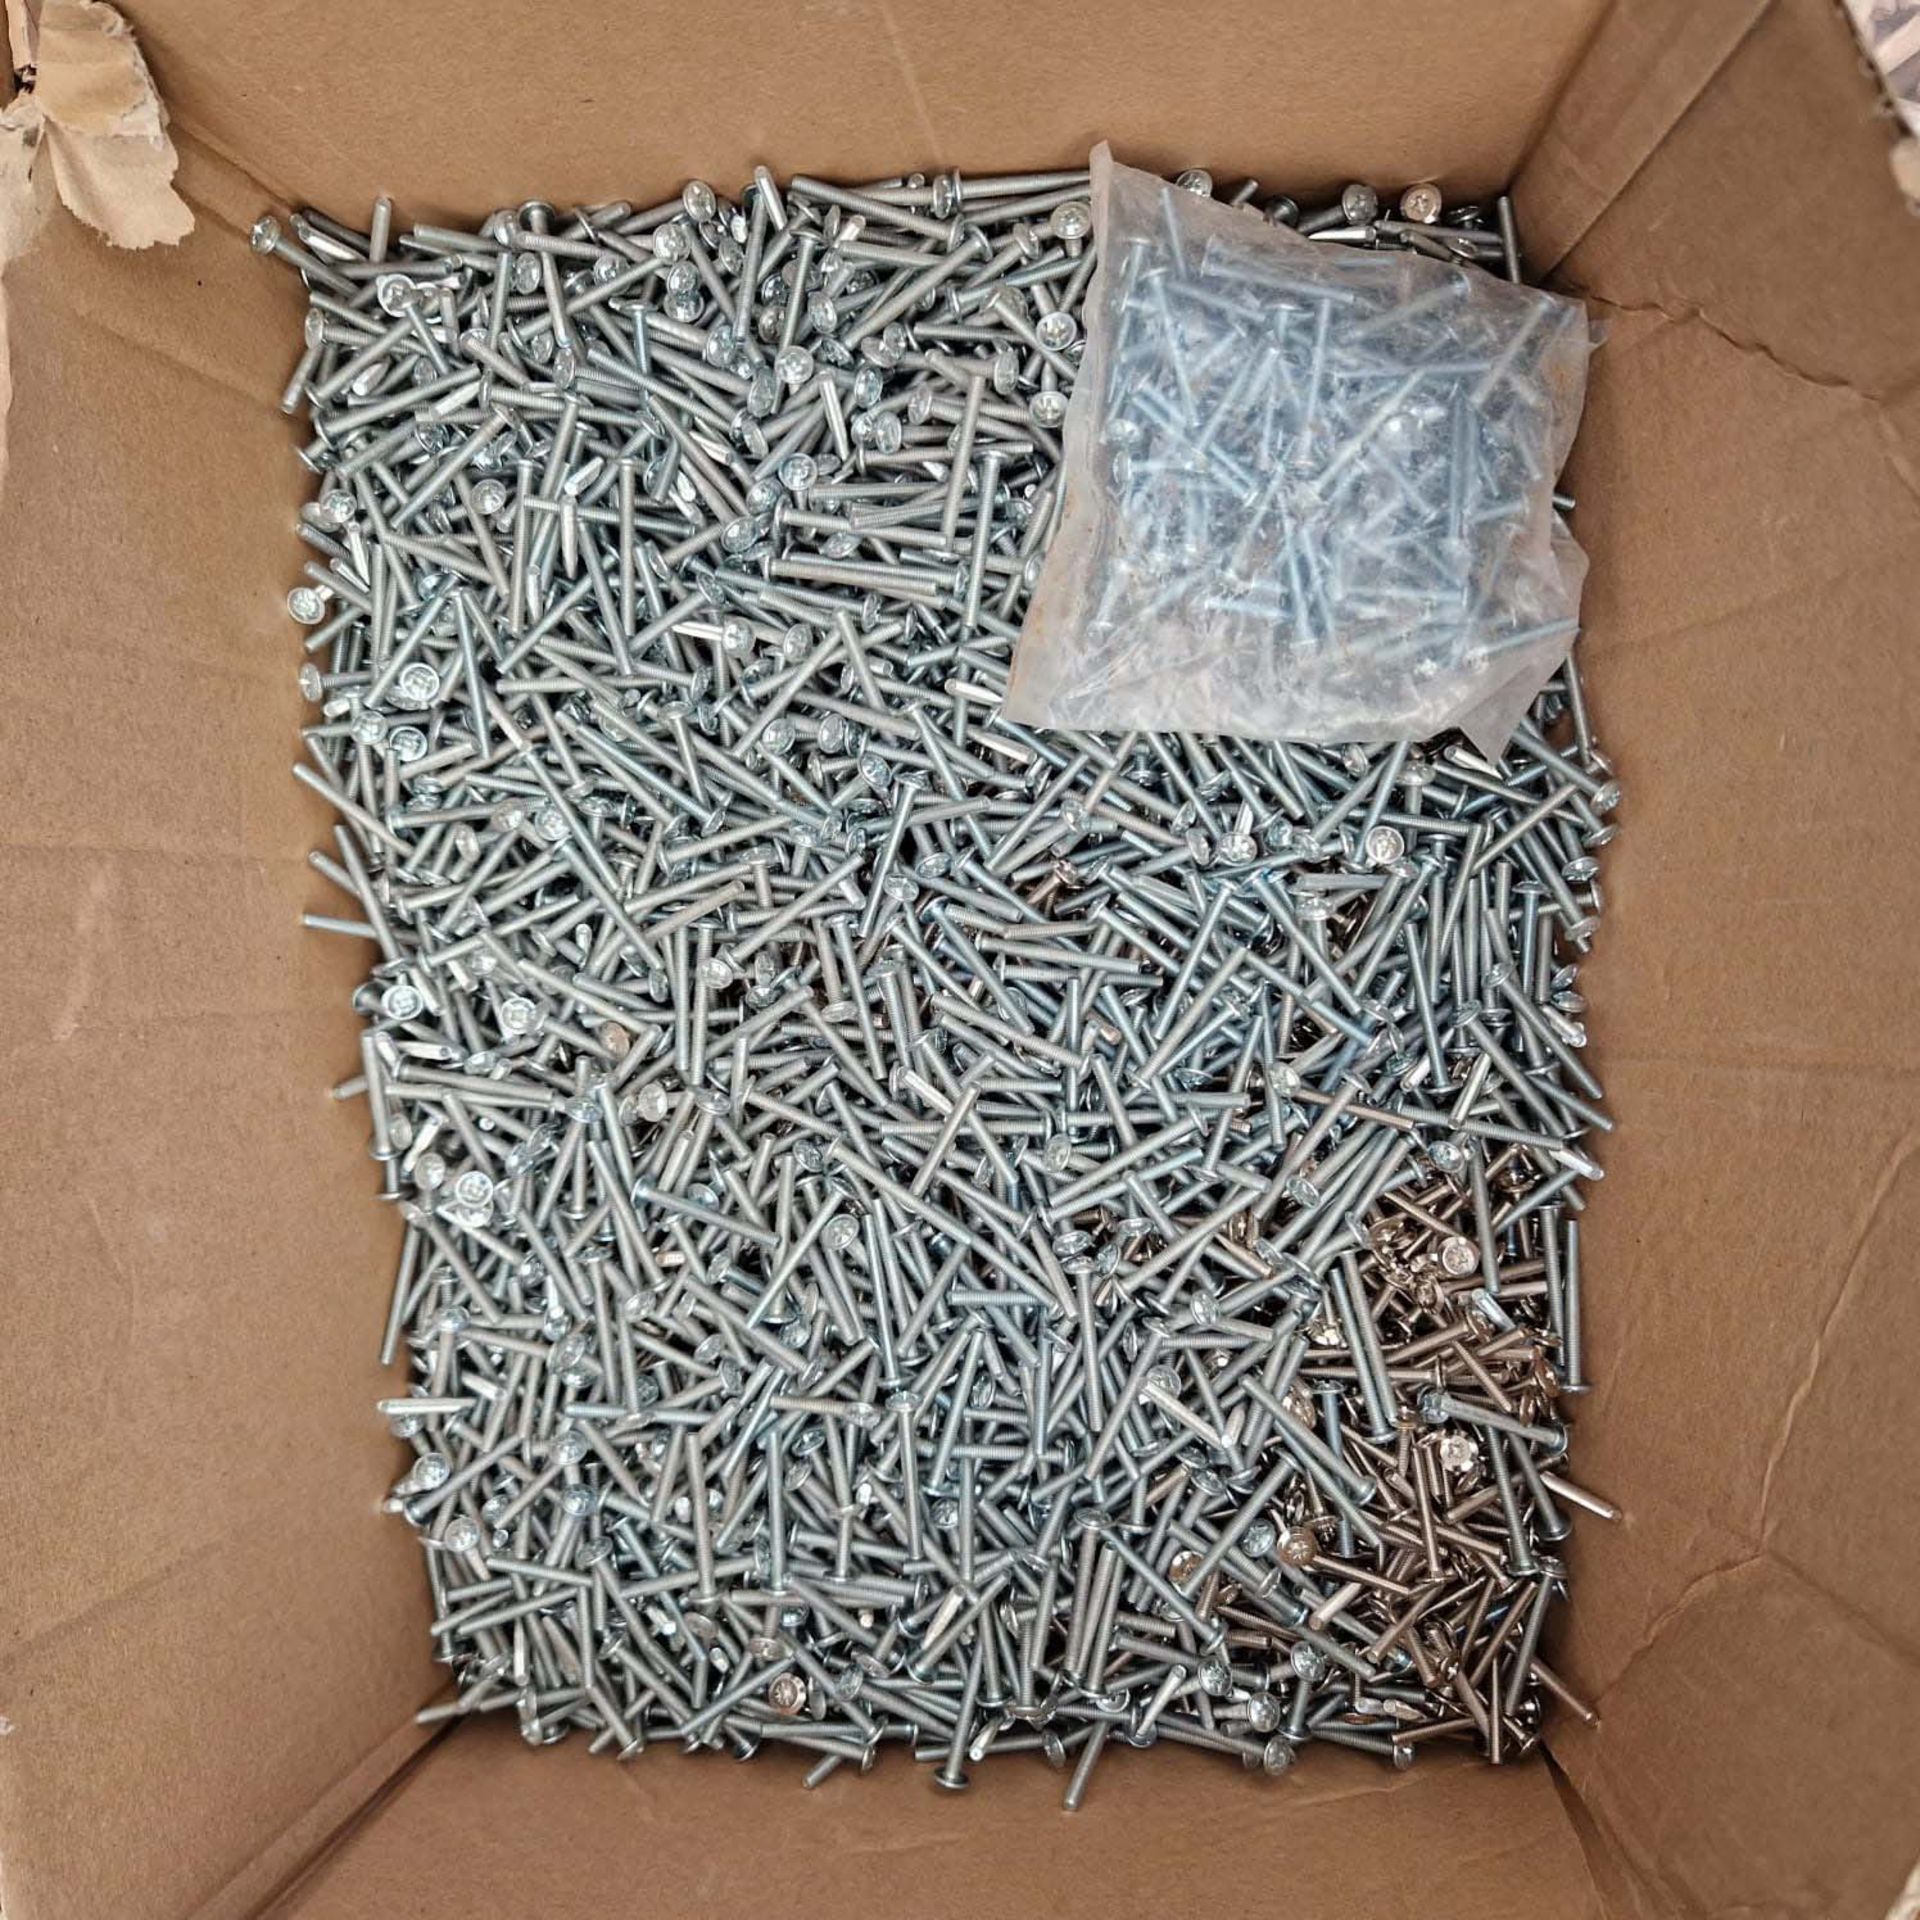 Quantity of Various Screws, Dowels & Hinges Etc. For Woodworking. - Image 12 of 24